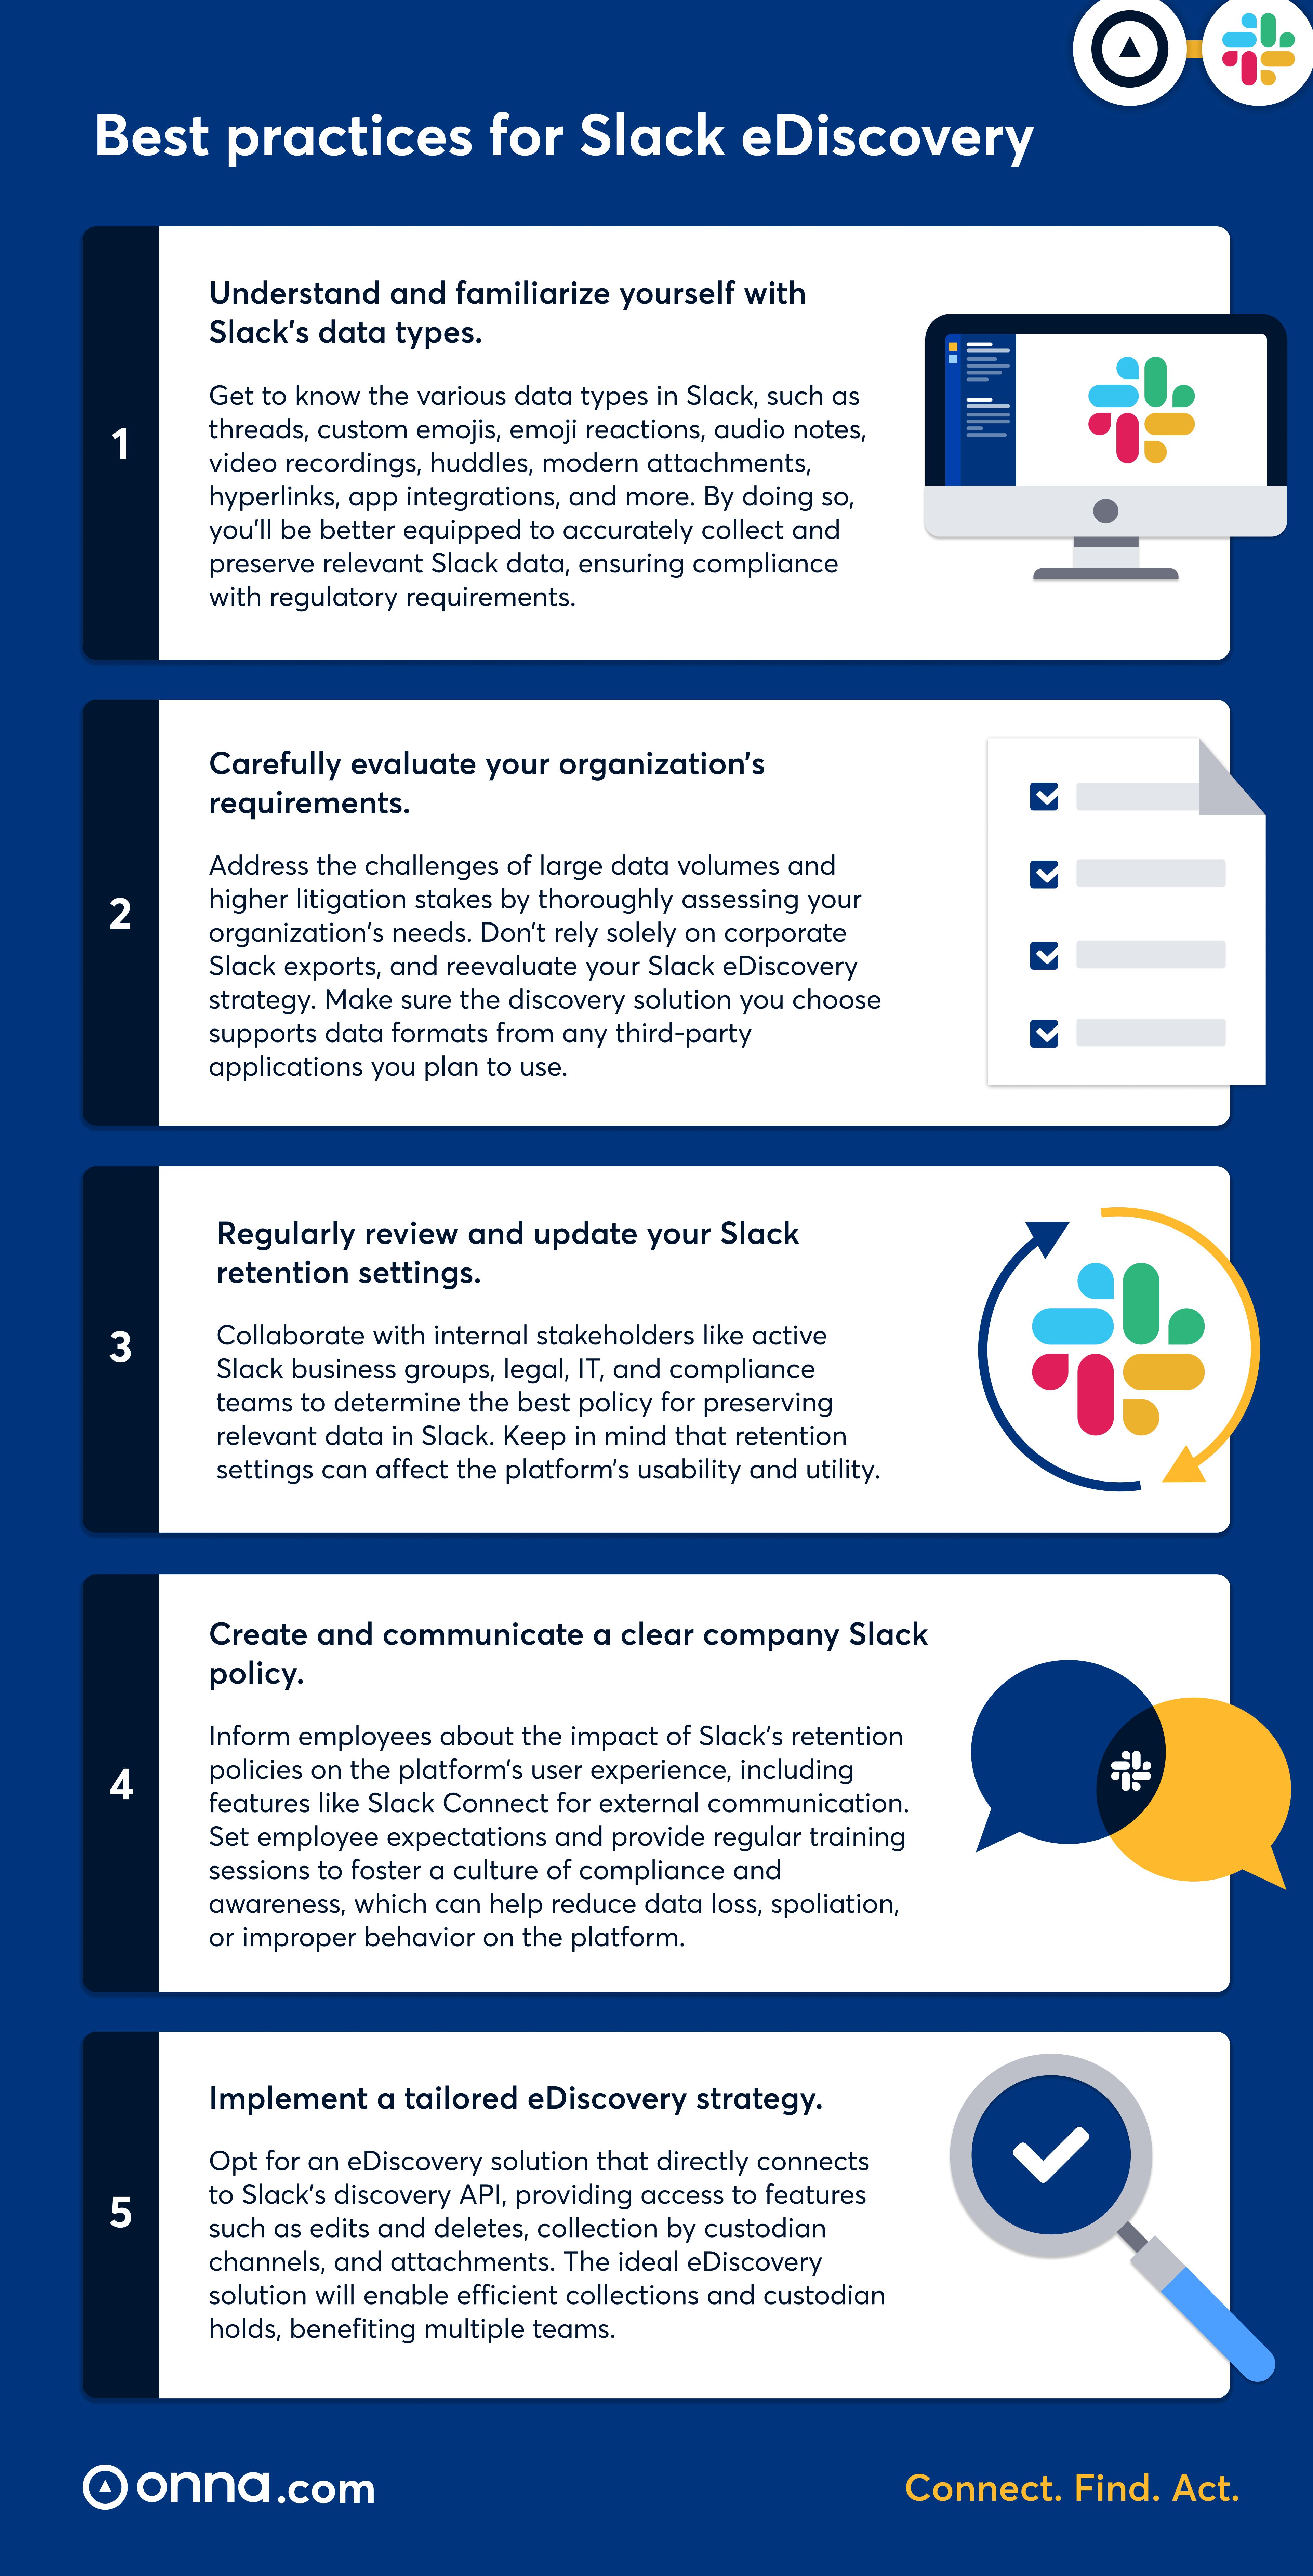 blog-image-ediscovery-for-slack-best-practices-infographic